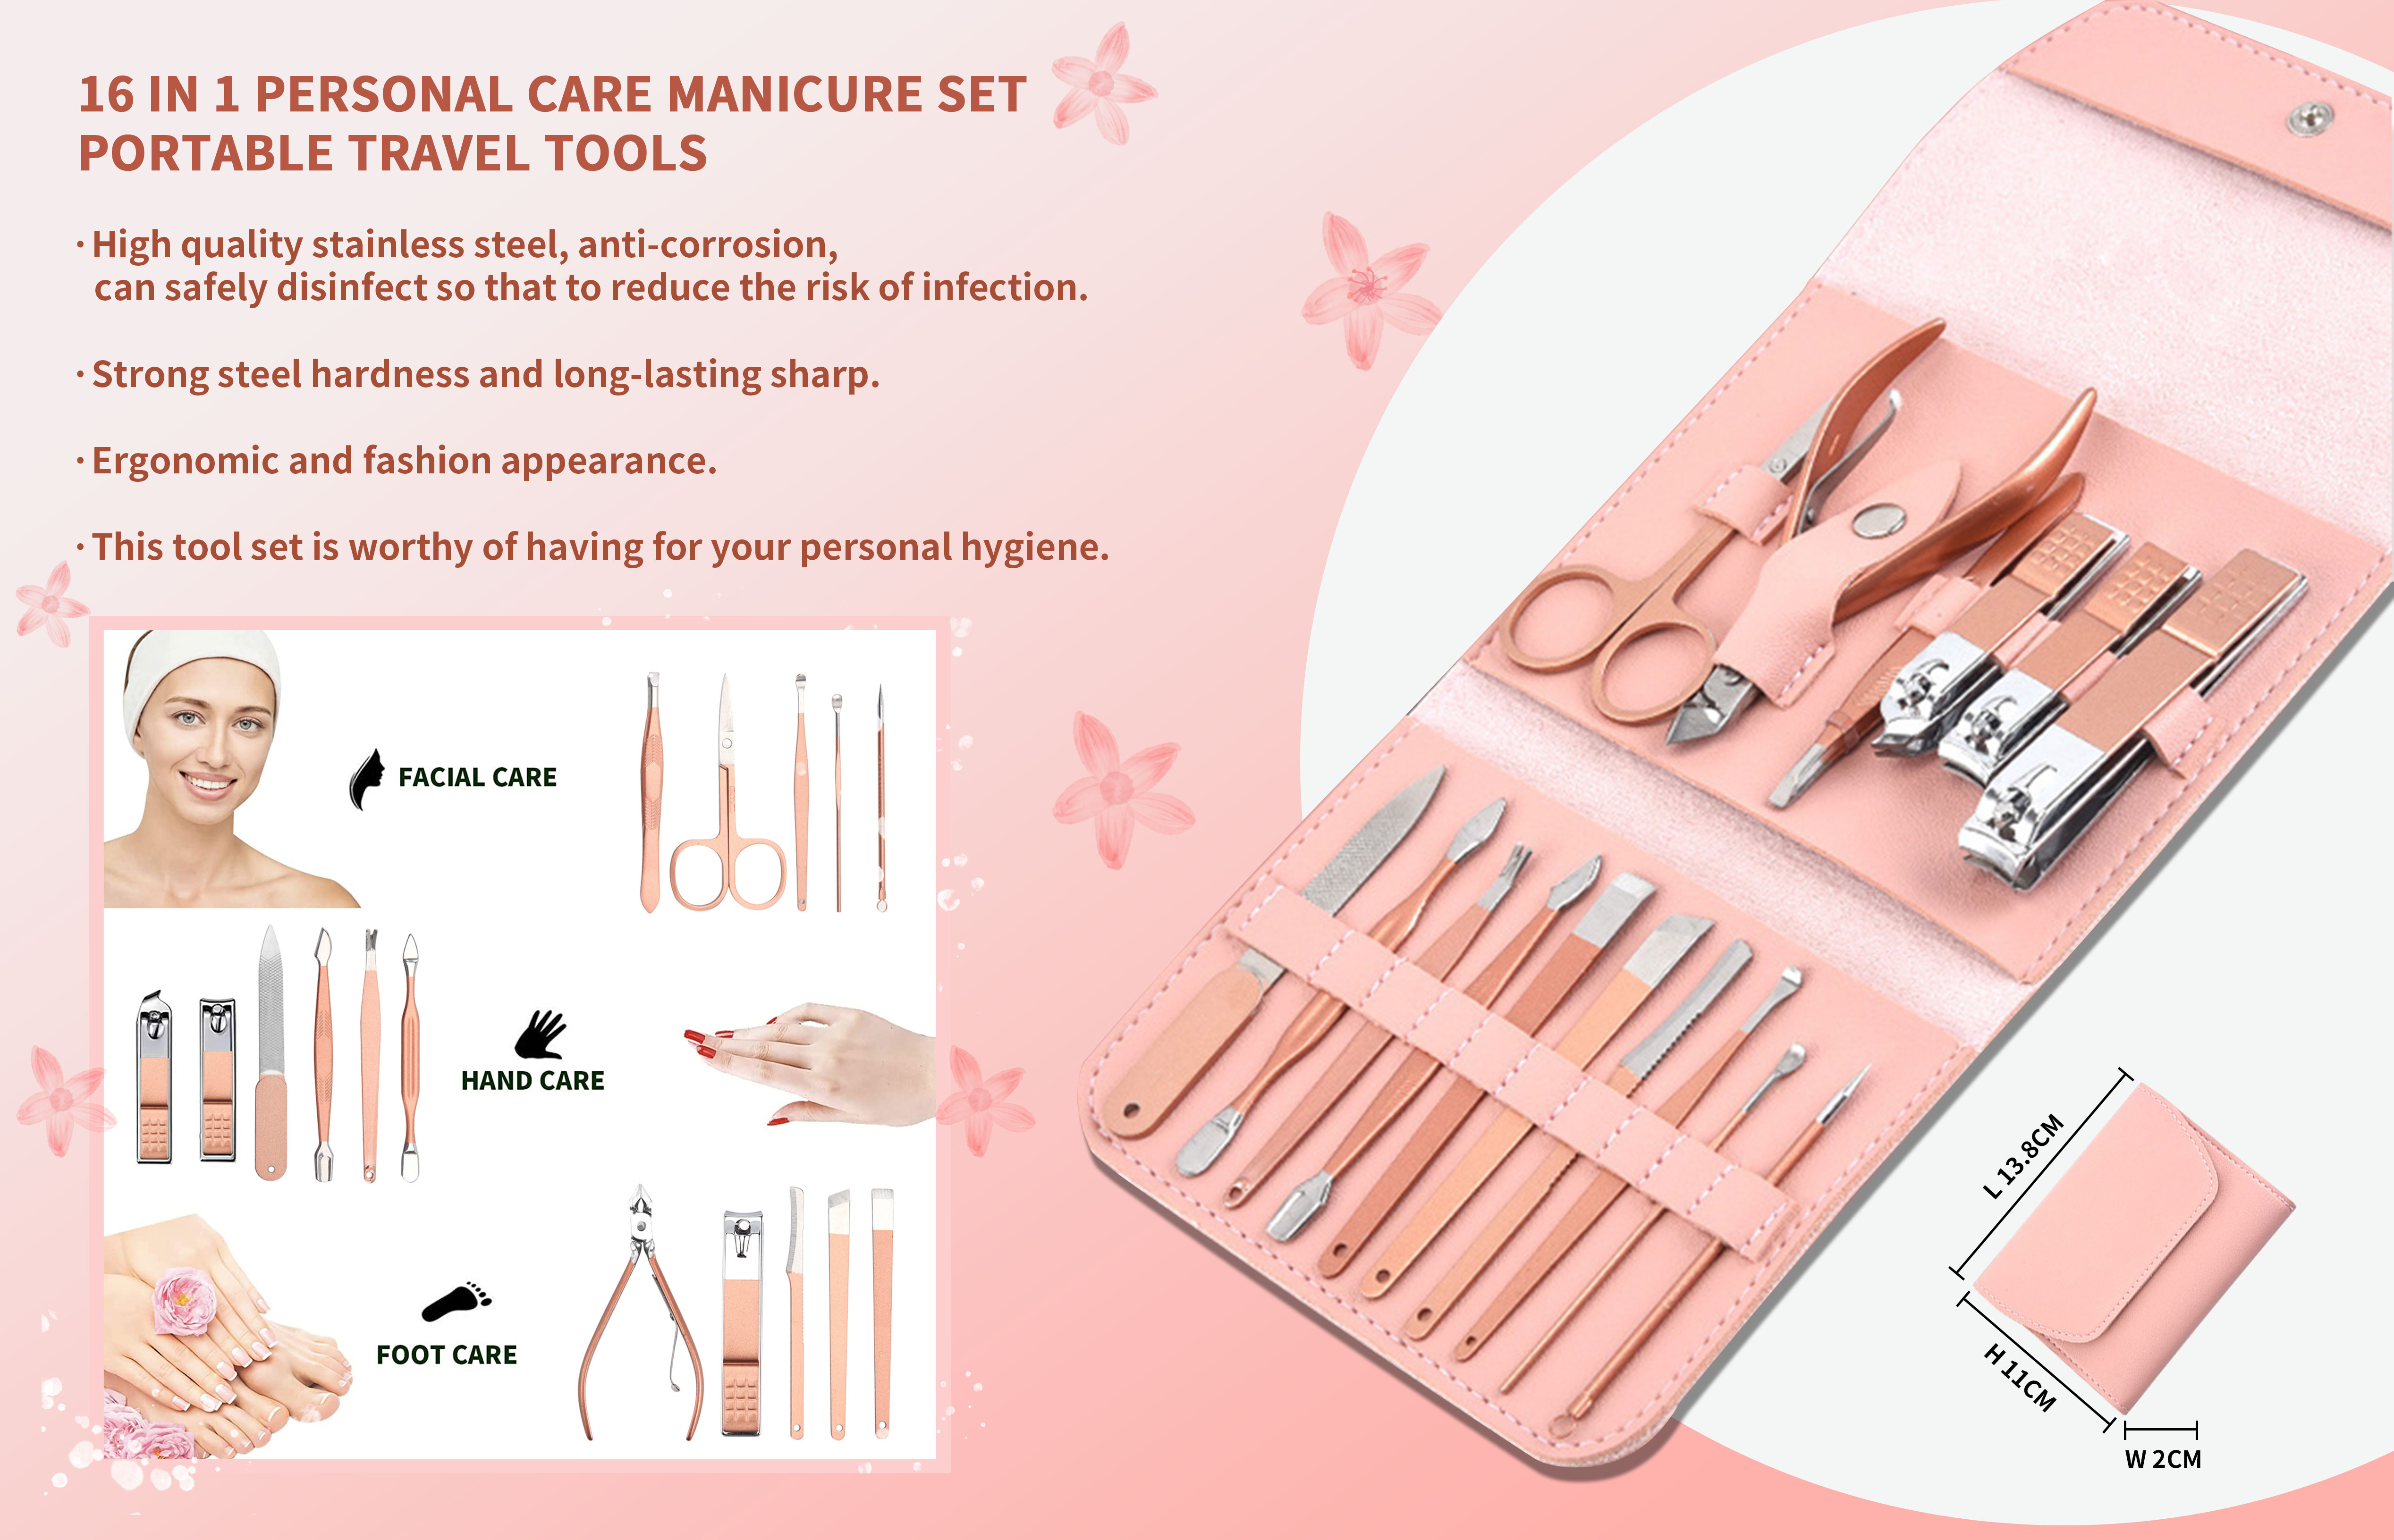 What do you know about manicure tools? They make nails more refined